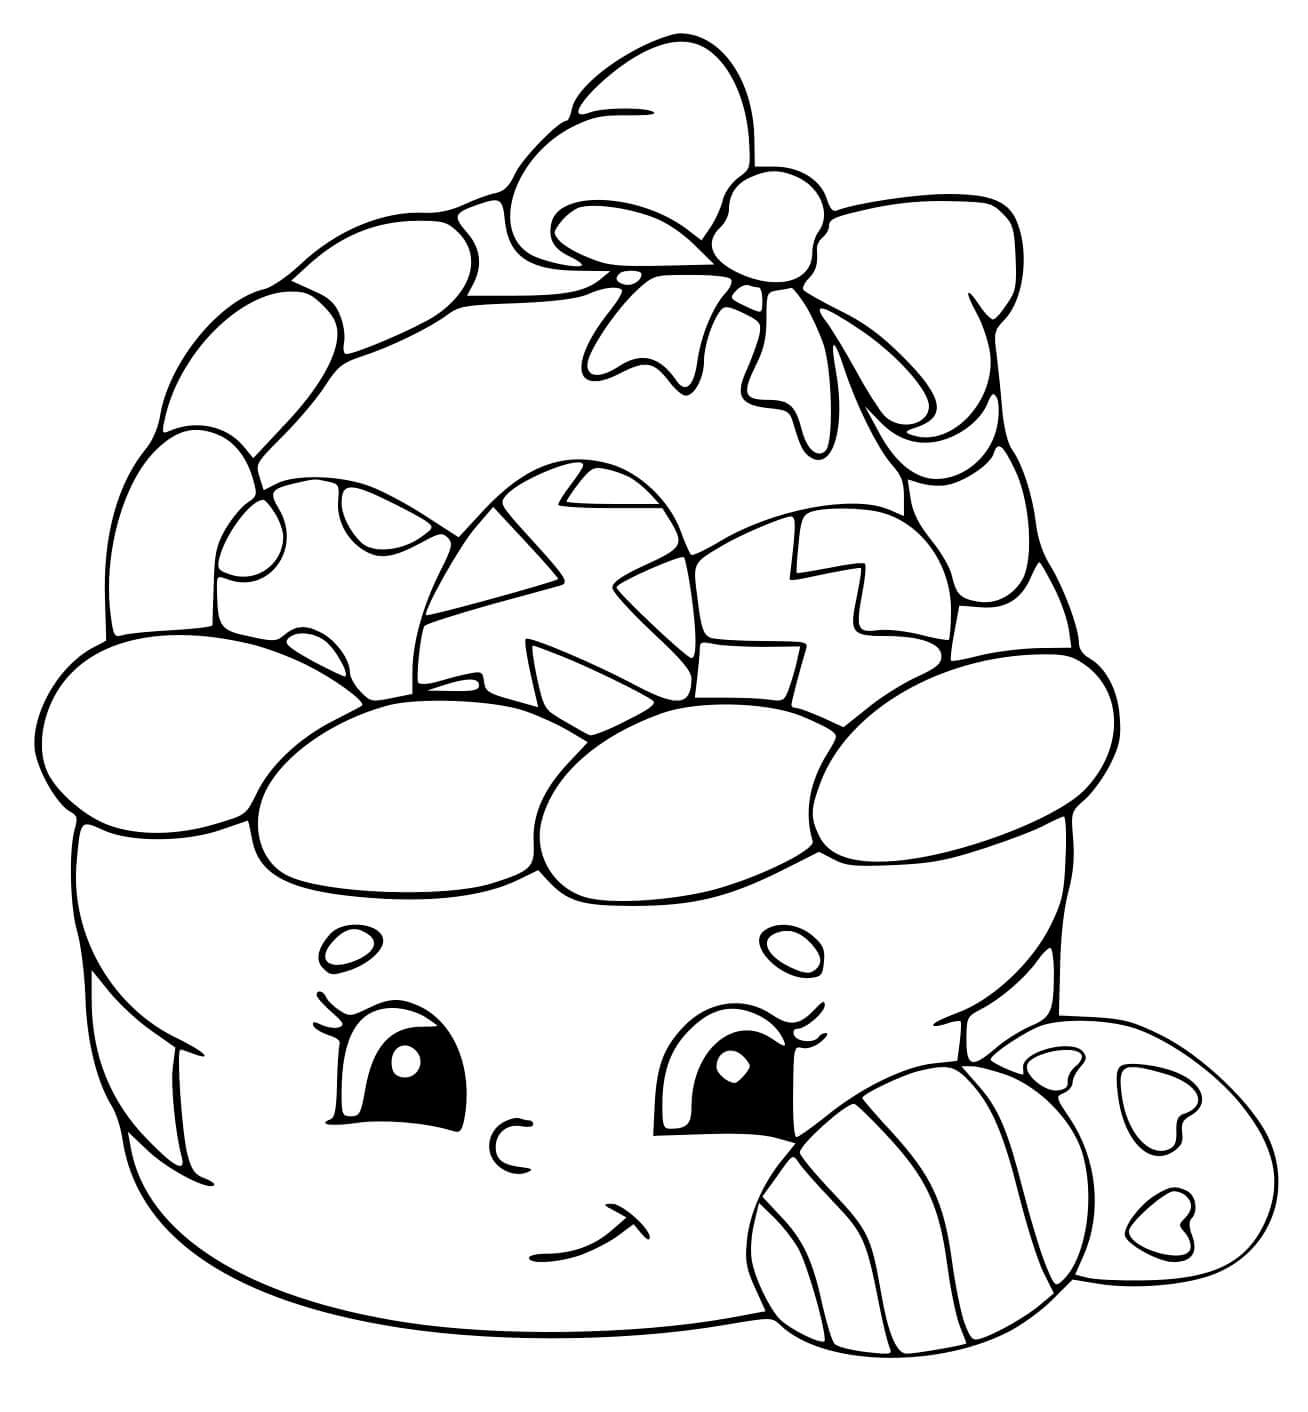 Kids Easter Basket Cheerful Coloring Page